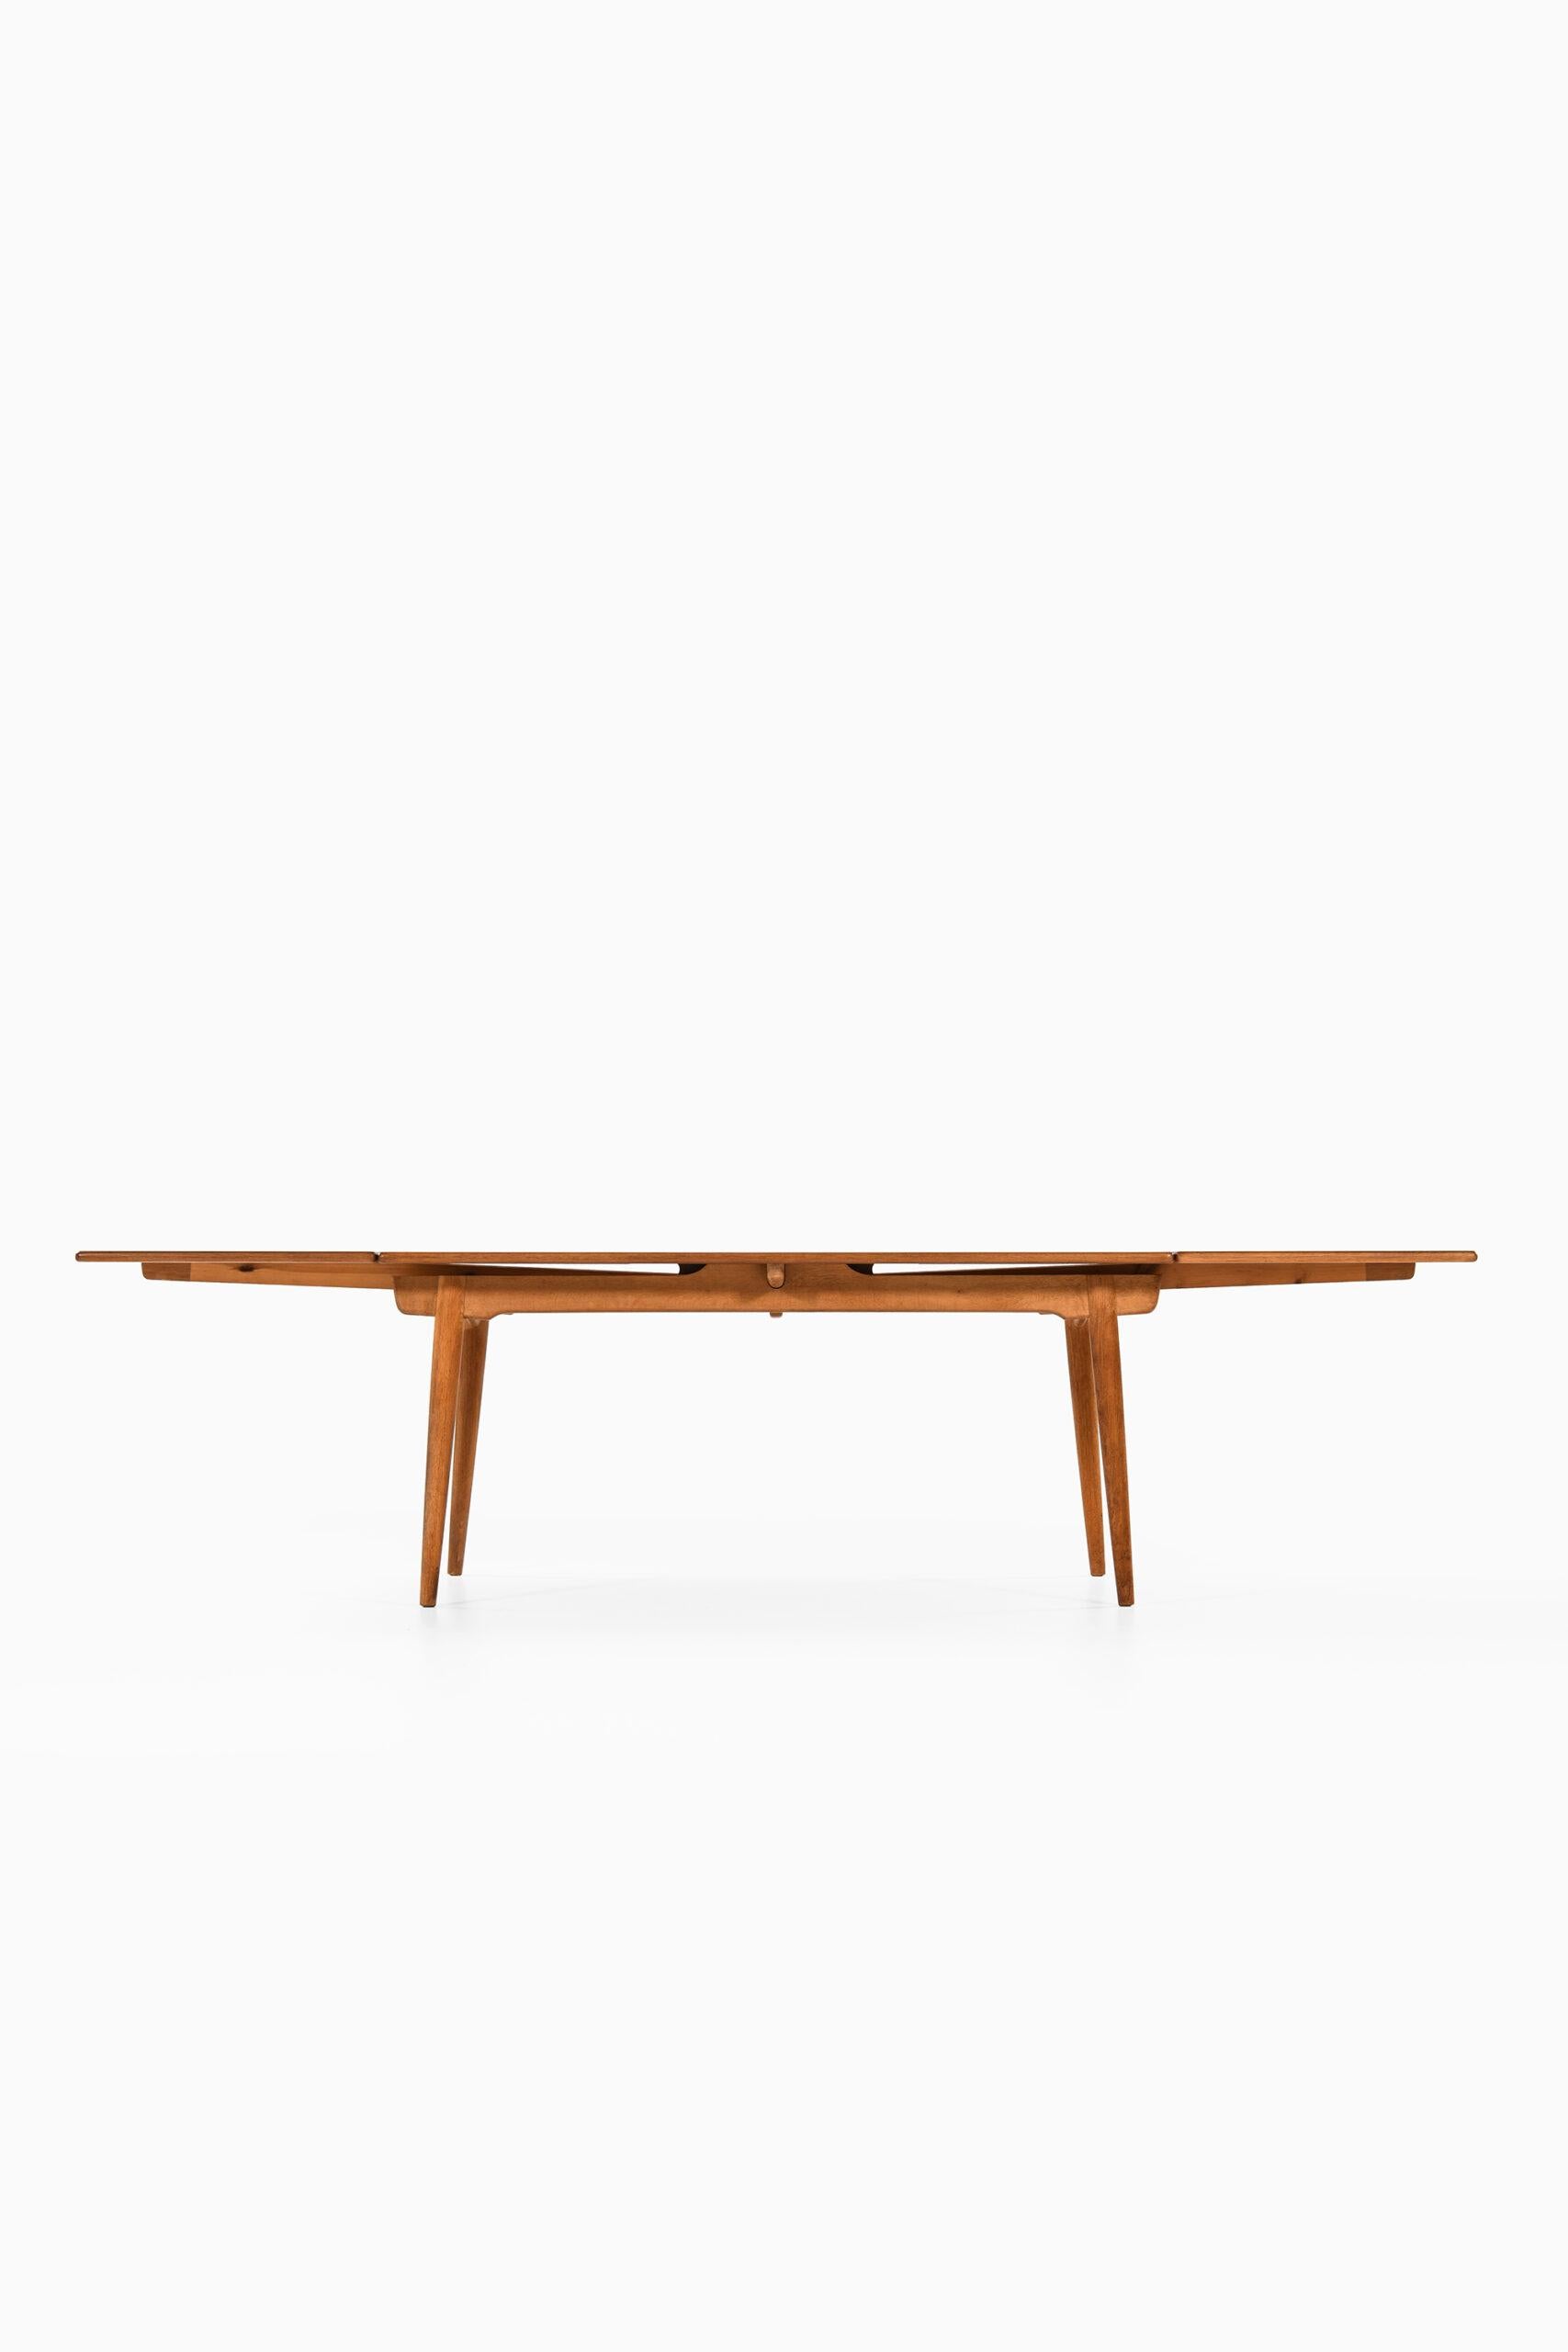 Mid-20th Century Hans Wegner Dining Table Model AT-312 Produced by Andreas Tuck in Denmark For Sale